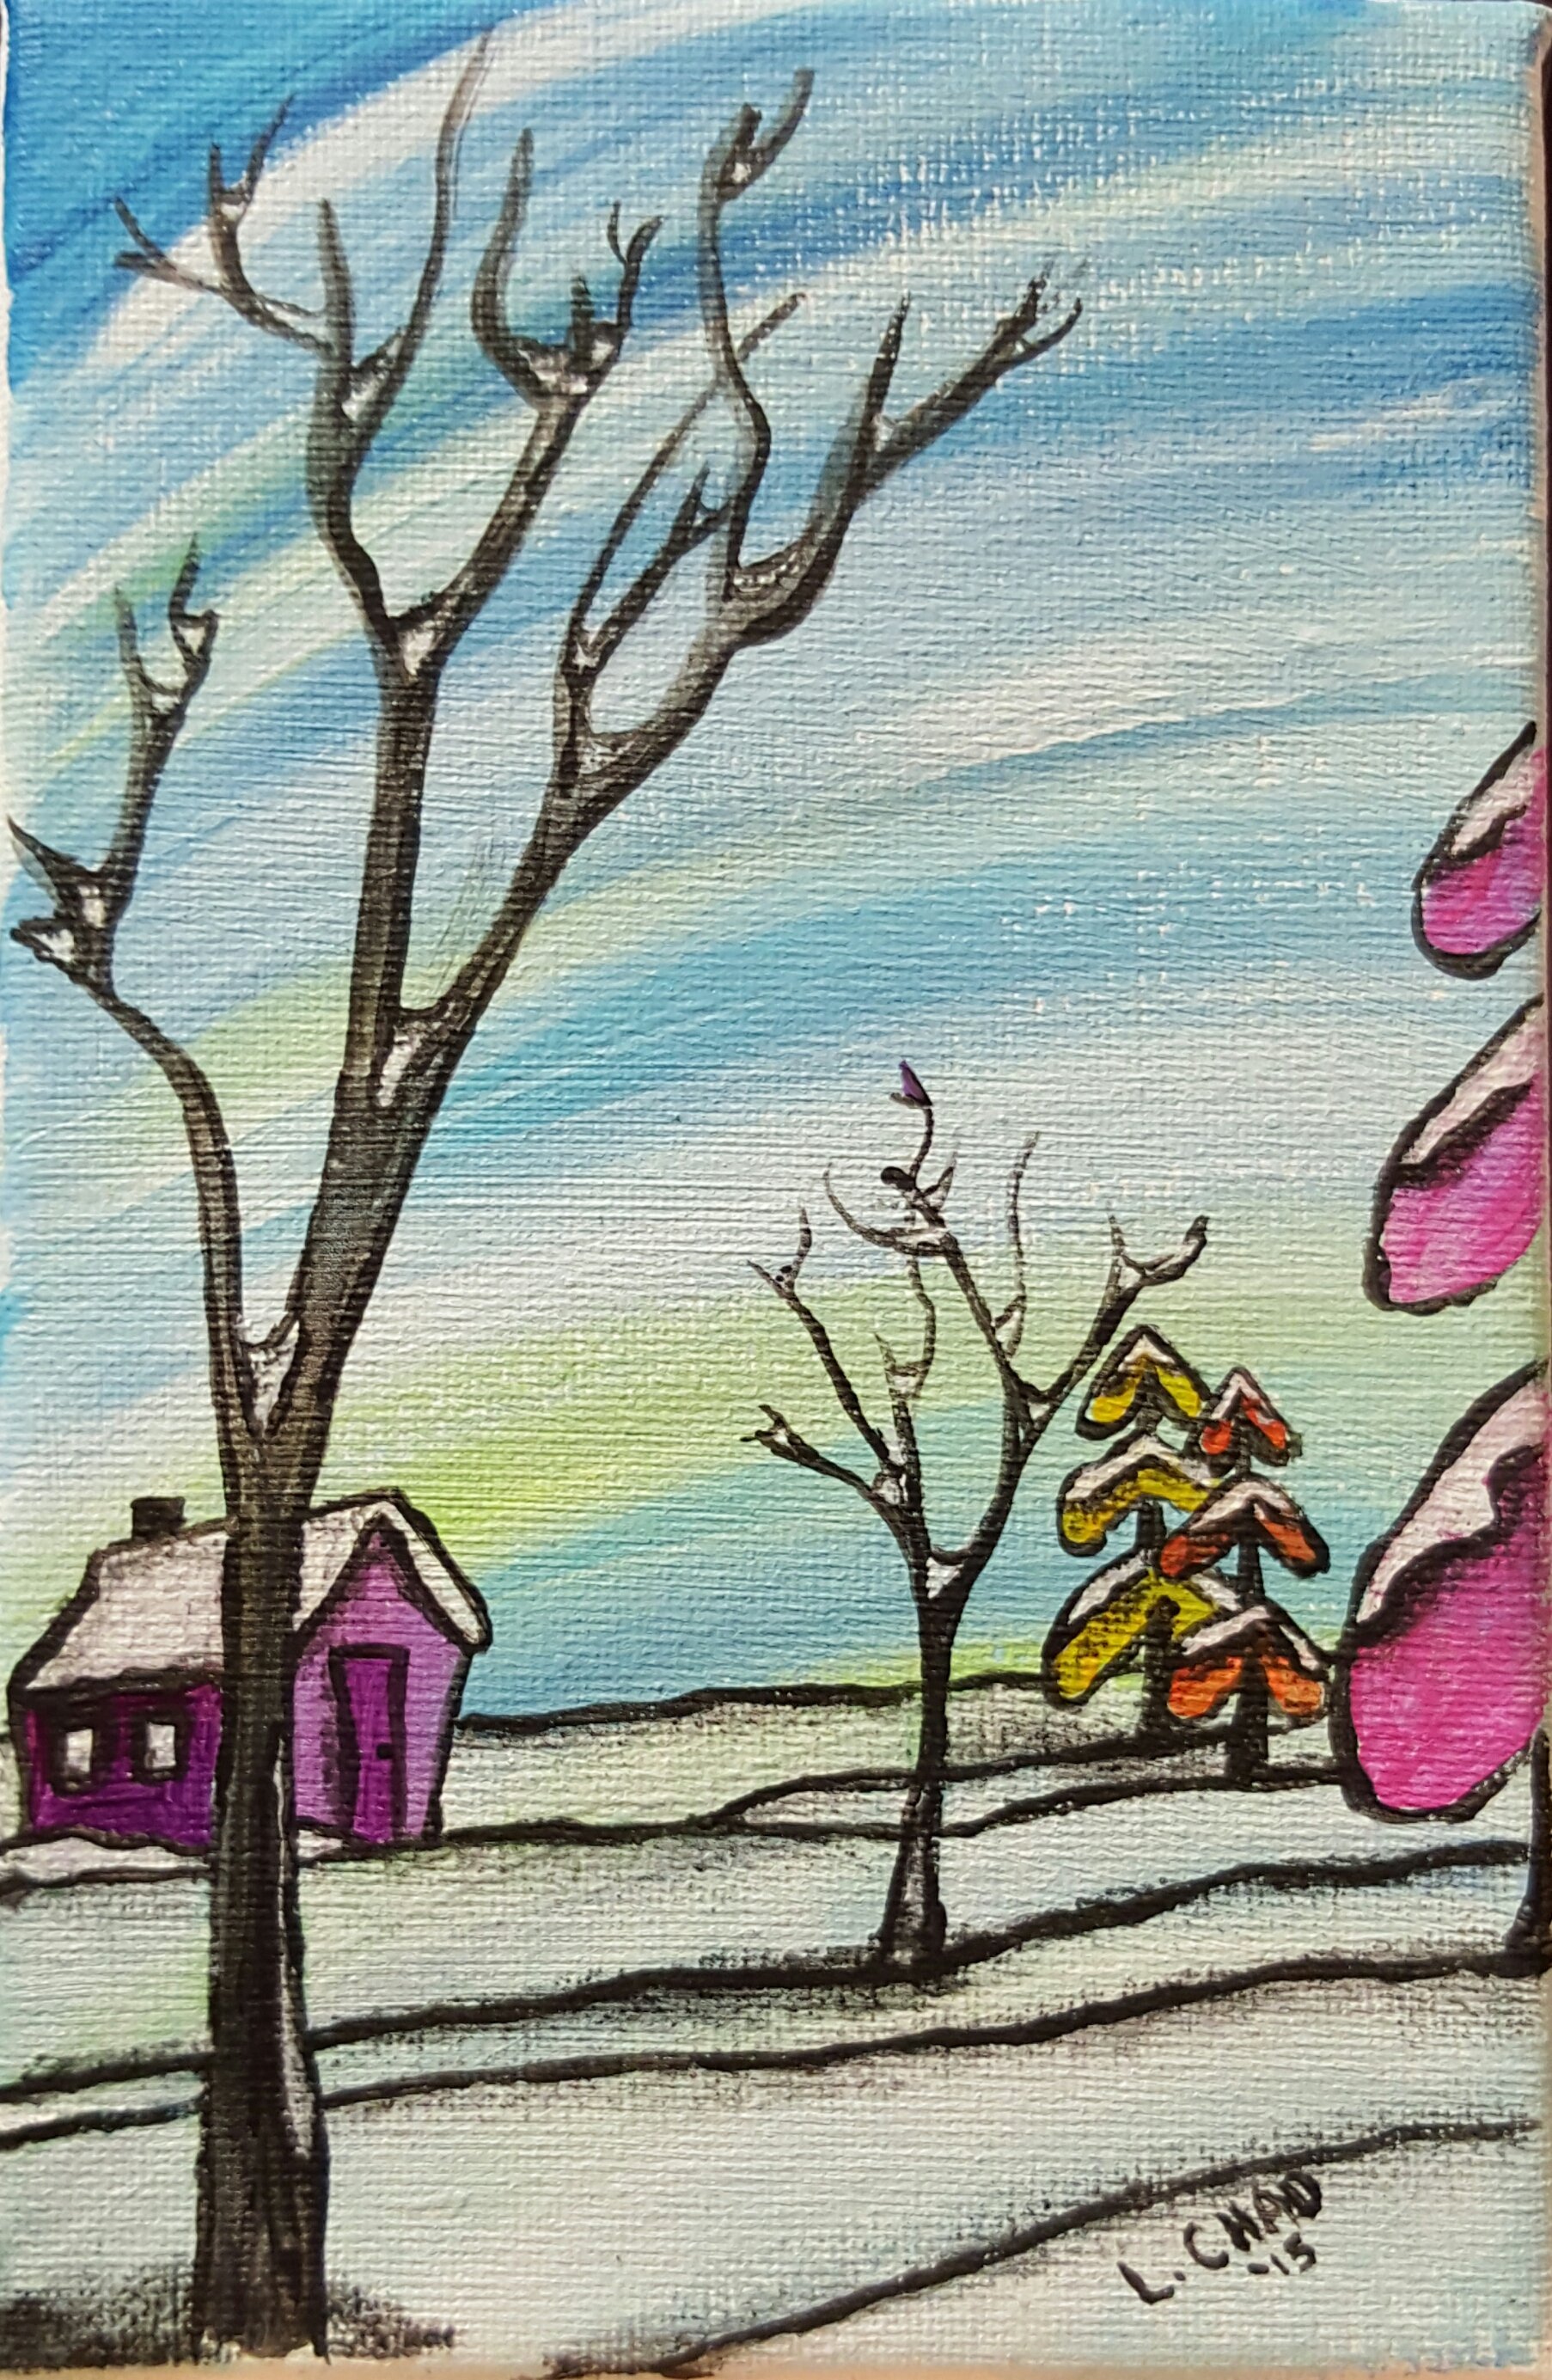 "Winter Solstice" [2015]
Mixed media on canvas. 7" x 4.5" (unframed with easel)
SOLD